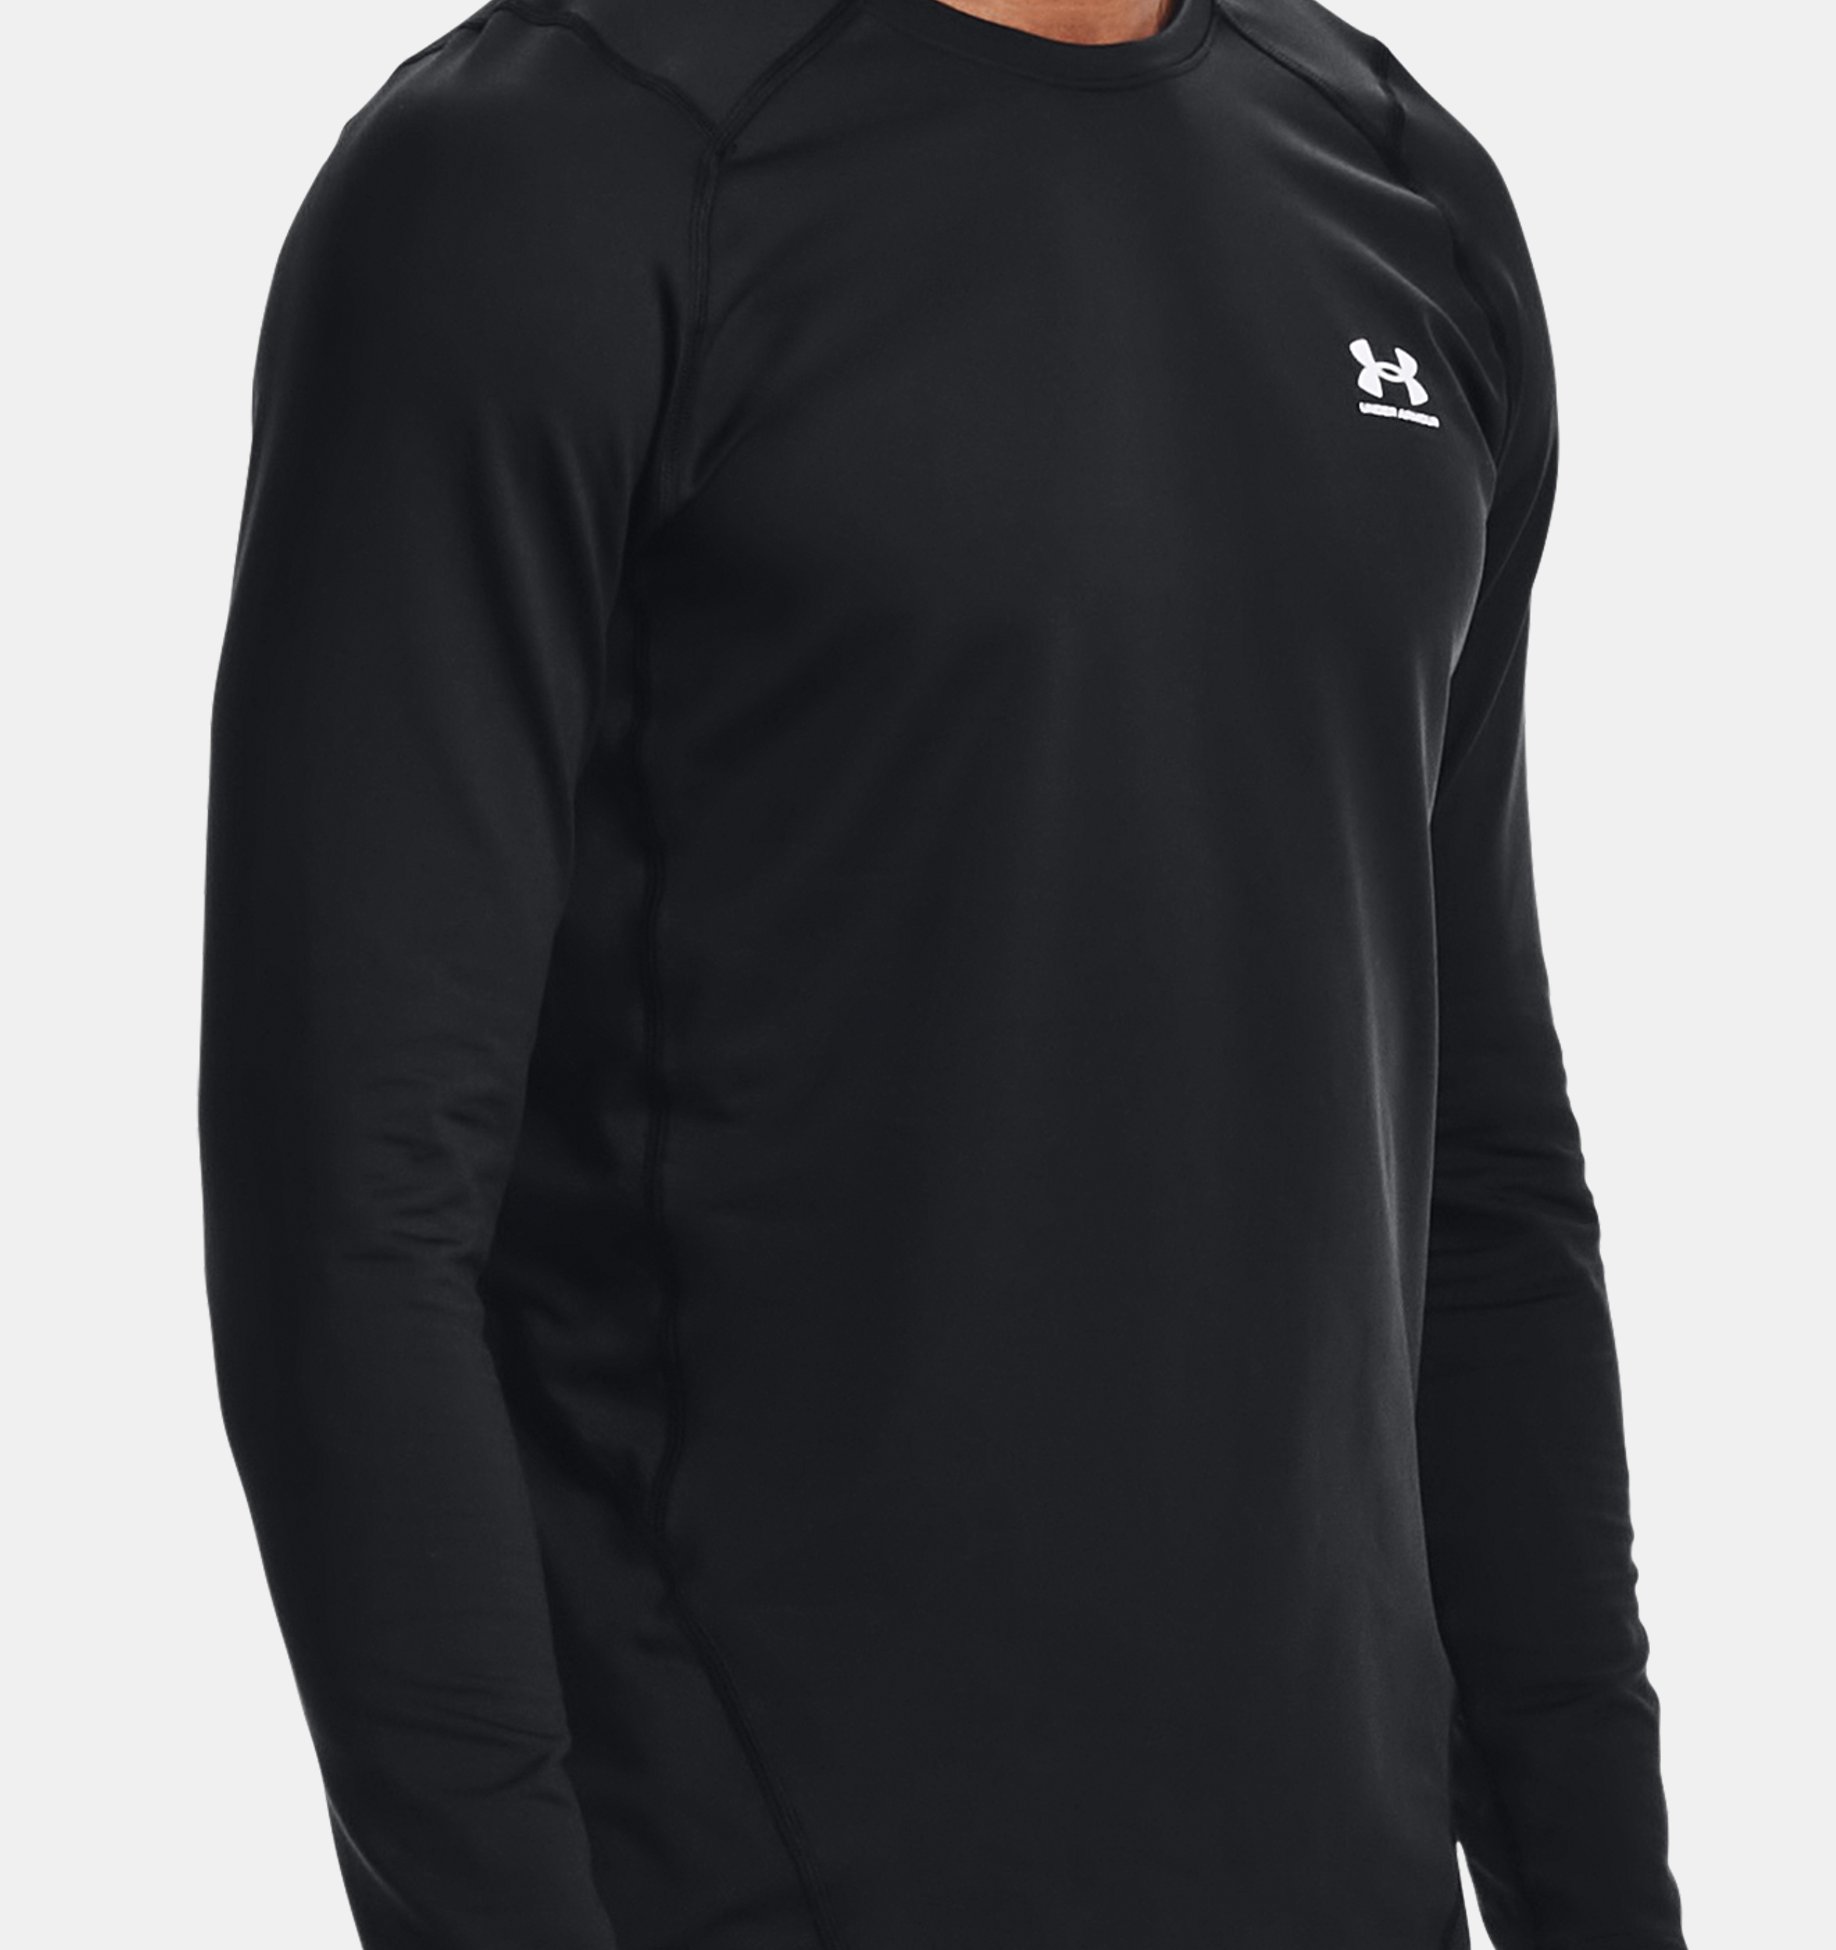 Under Armour Mens Cold Gear Leggings - Grey, Michael Murphy Sports, Donegal